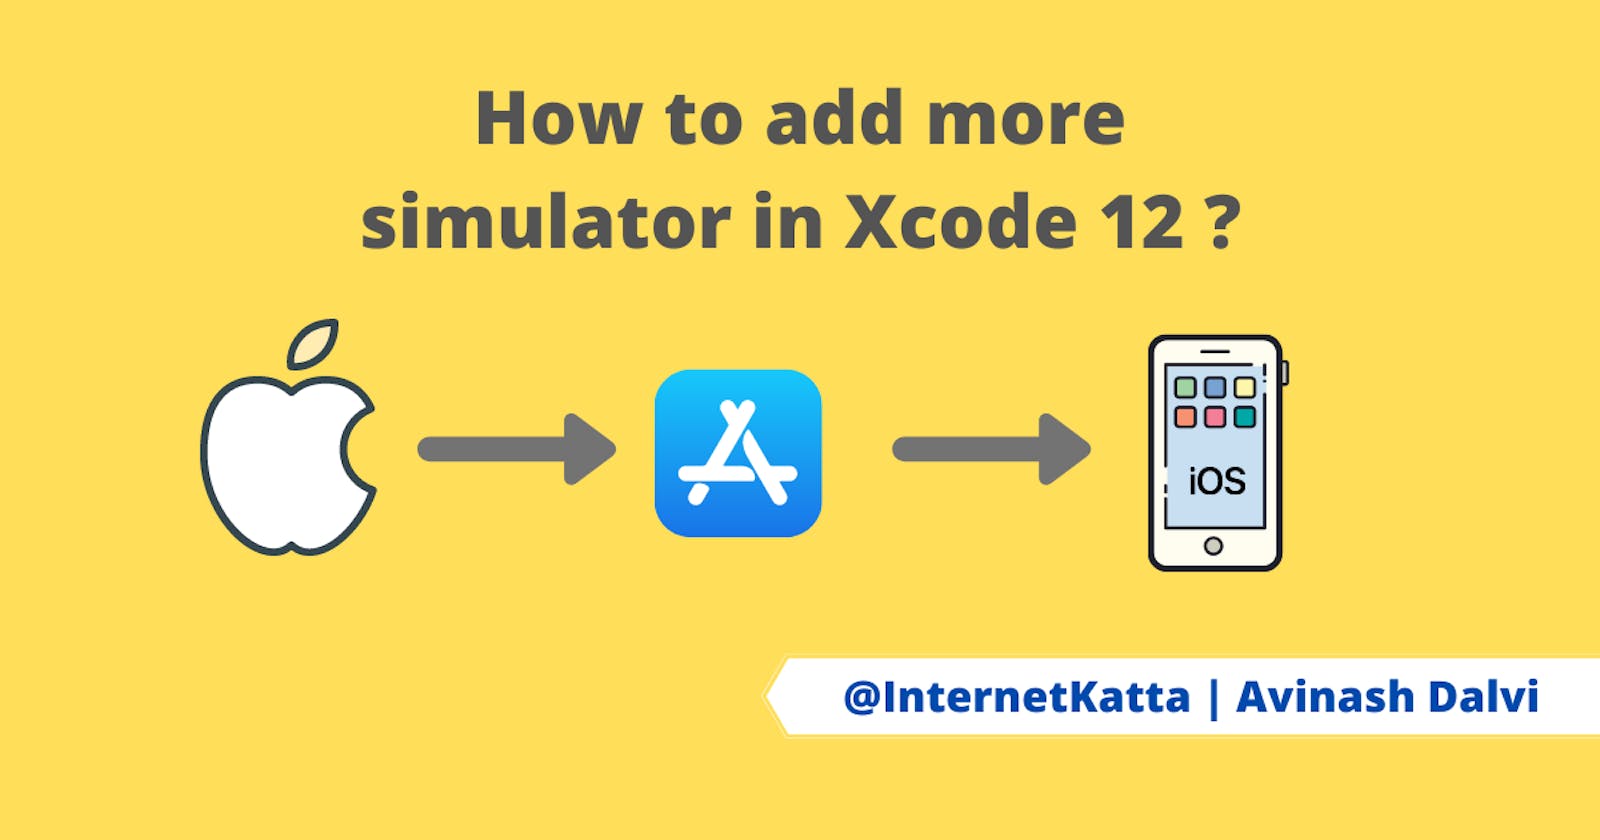 How to add more simulator in Xcode 12 ?